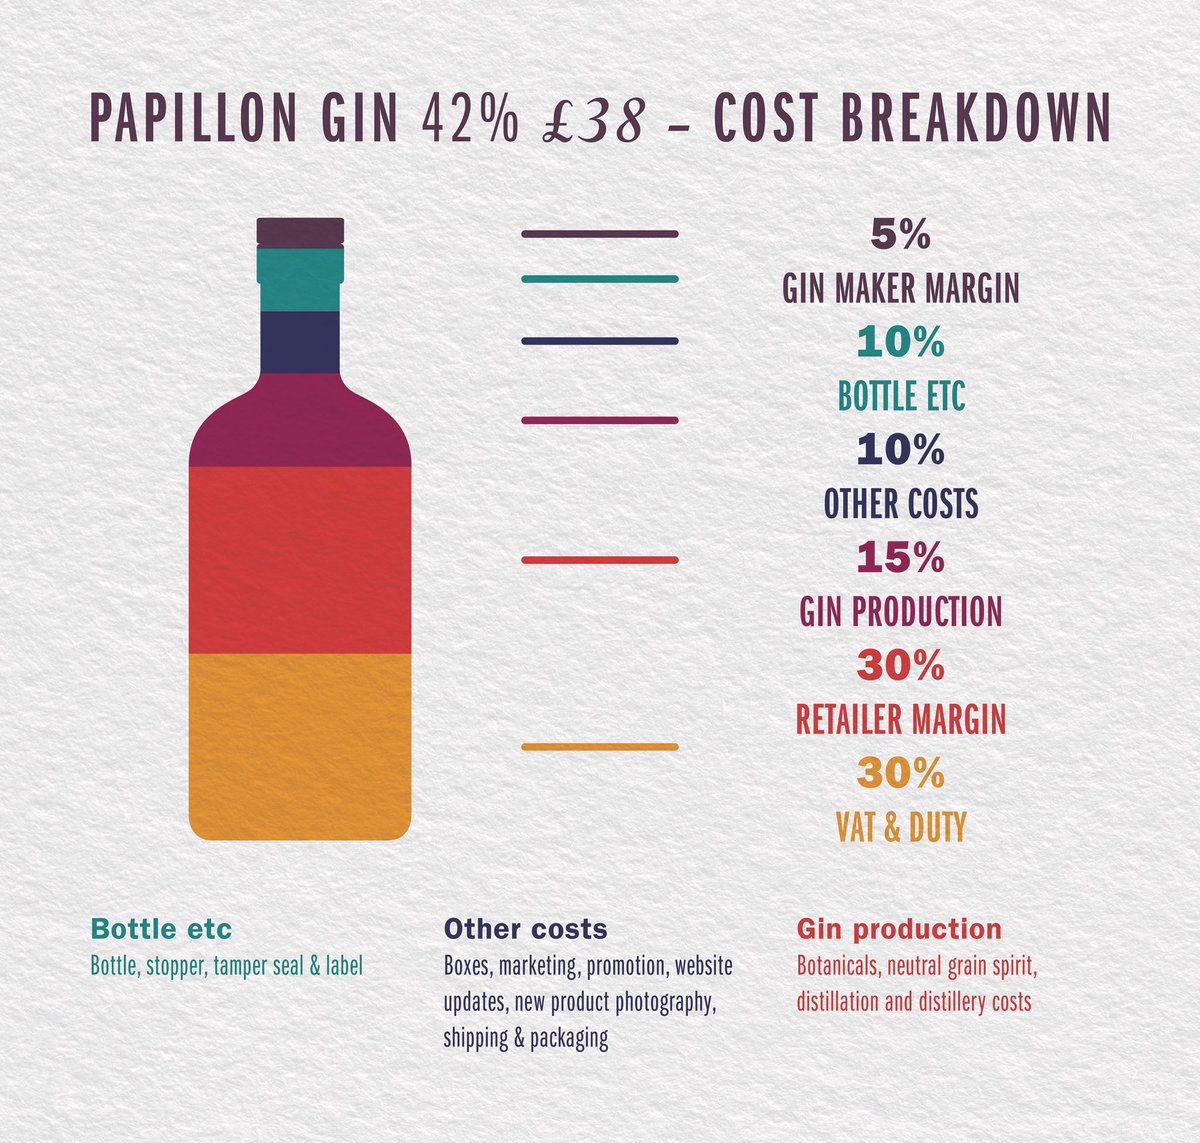 Thought I’d share this infographic with you. It’s not a moan or a complaint. Just a simple explanation of how small the margins are in craft distilling. We’re closing down, not retiring 😉 Fellow distillers, please feel free to steal and share. #papillongin #gin